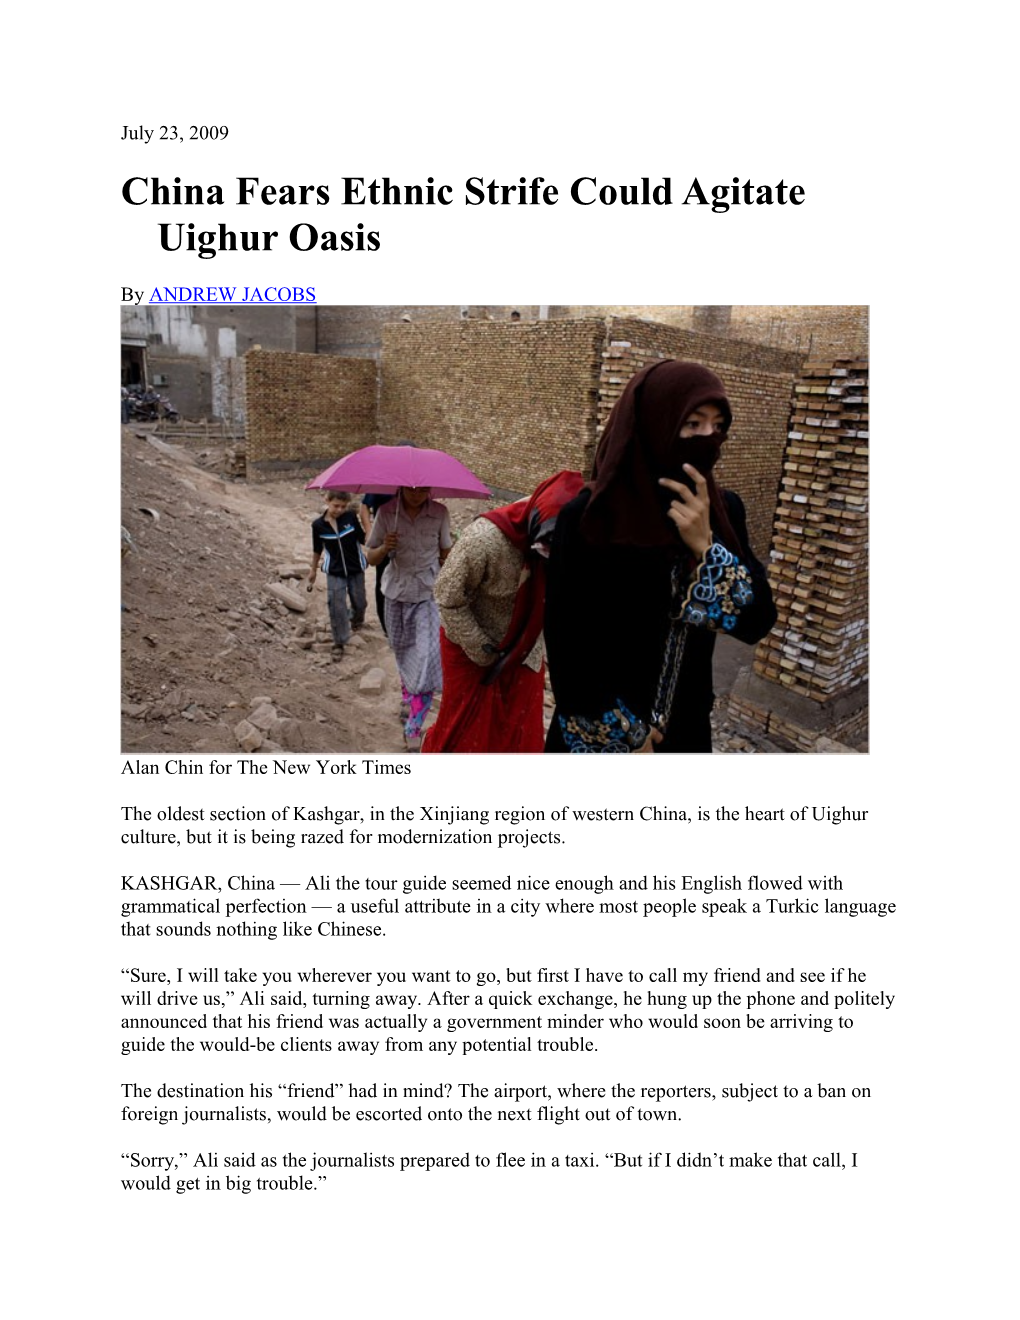 China Fears Ethnic Strife Could Agitate Uighur Oasis